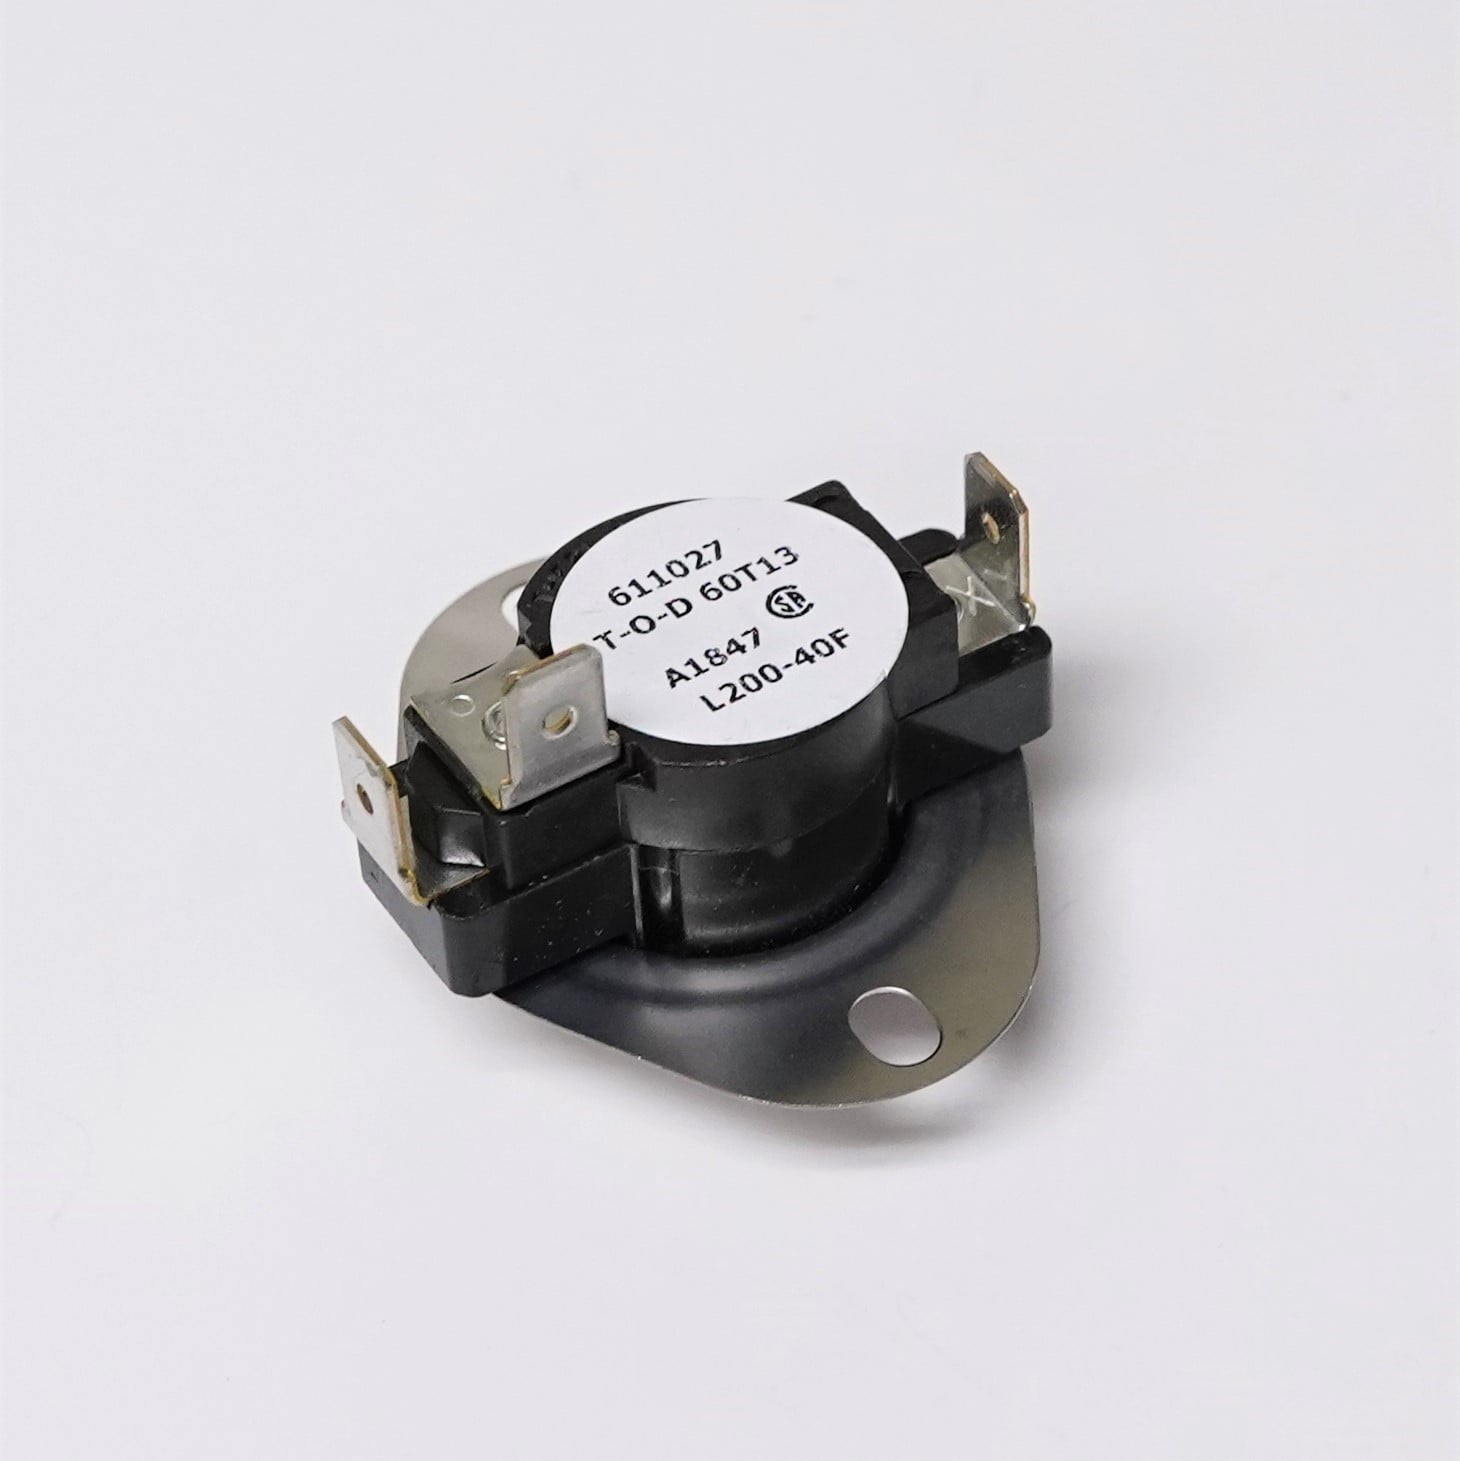 SUPCO LD200 Thermostat 60t13 Style 611027 for sale online 